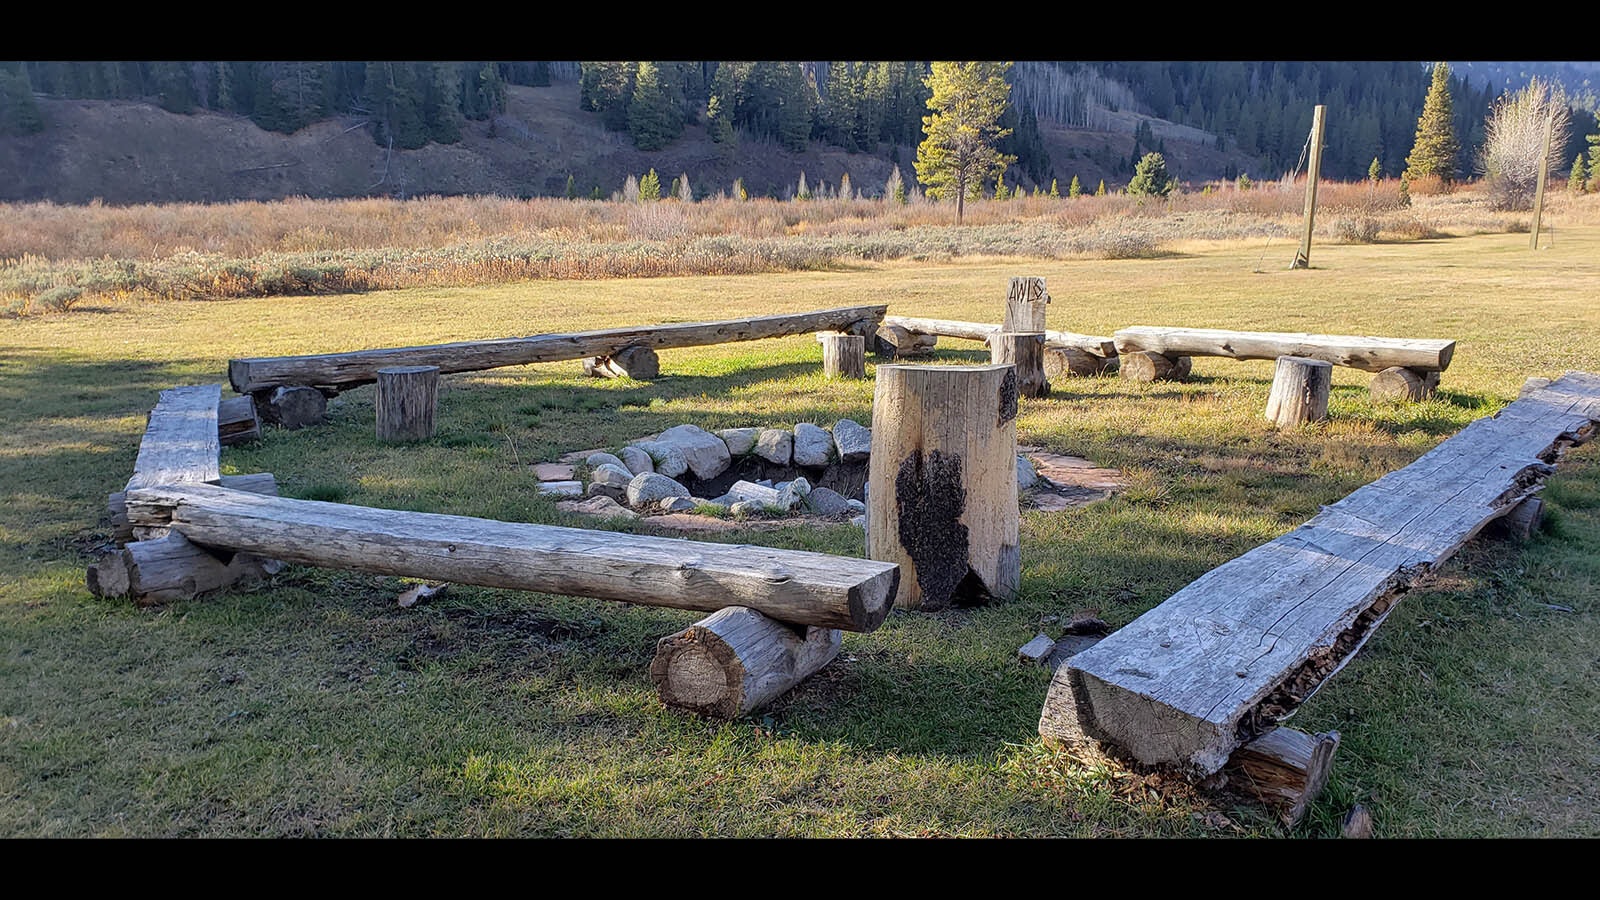 A fire pit with bench seating at Granite Creek Ranch.